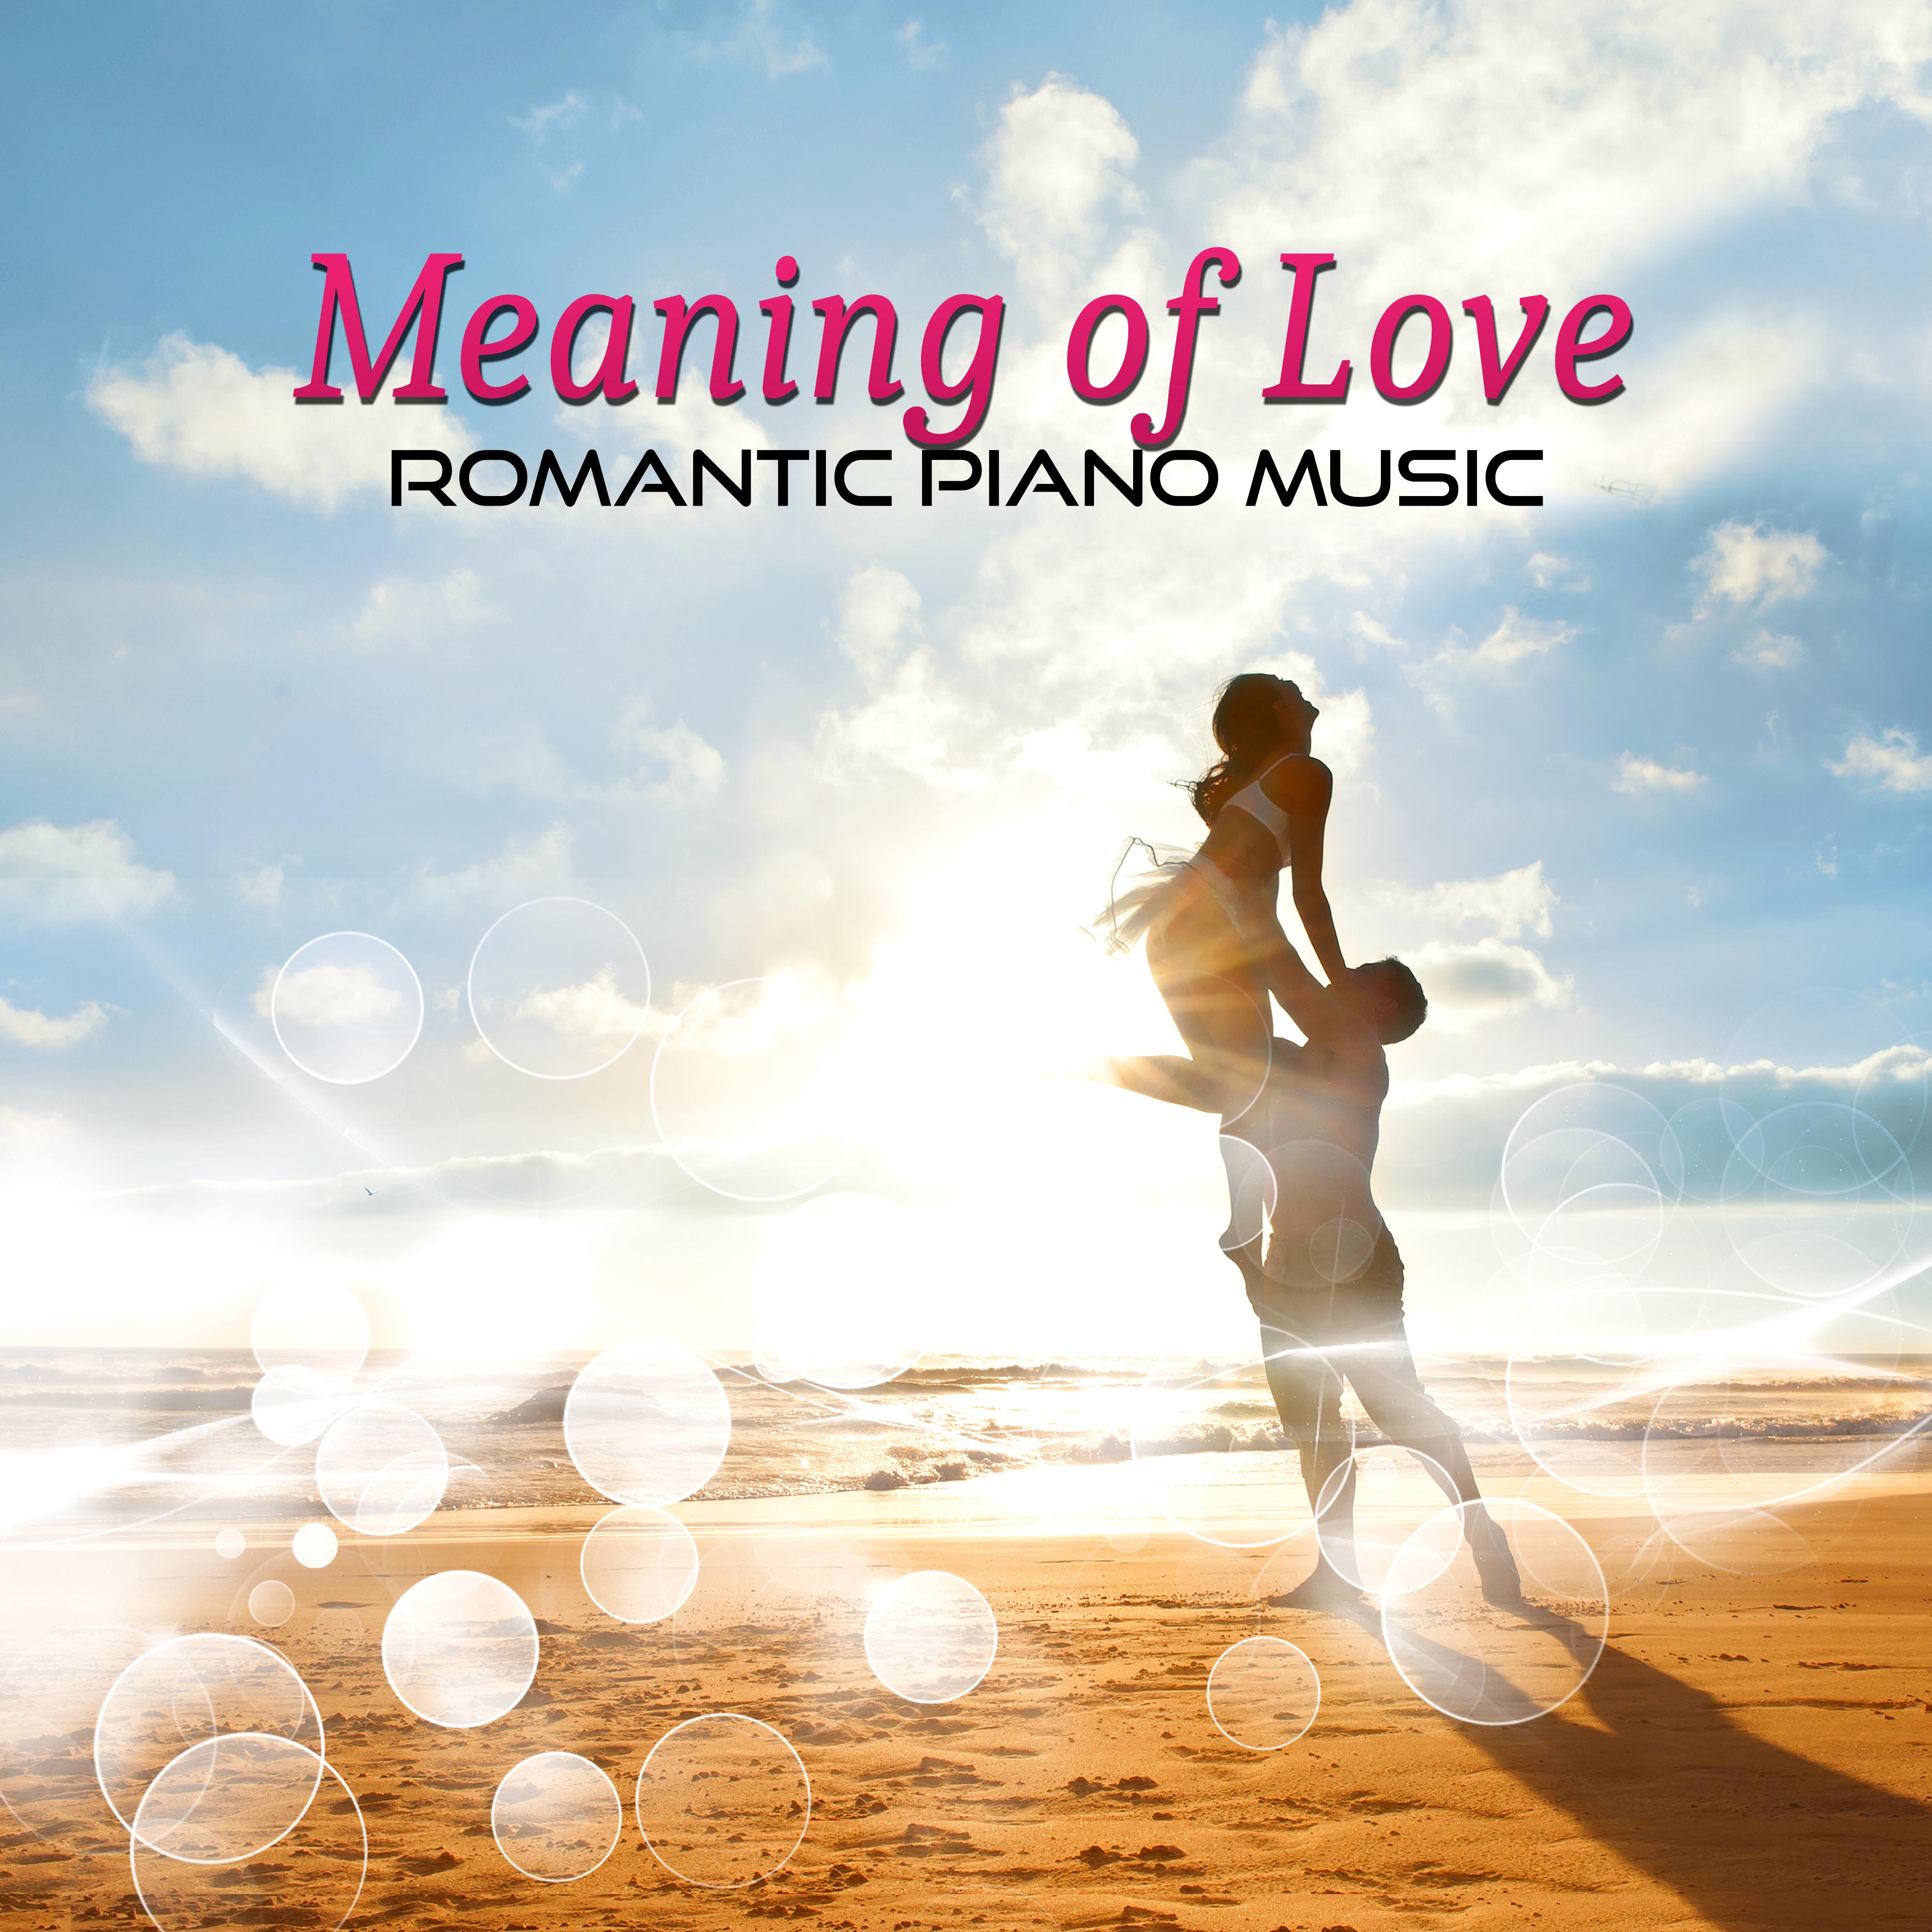 Meaning of Love  Romantic Piano Music, Love Songs, Candle Light Dinner, Relaxation with Smooth Jazz  Piano Bar Music, Date Night, Proposal, Anniversary